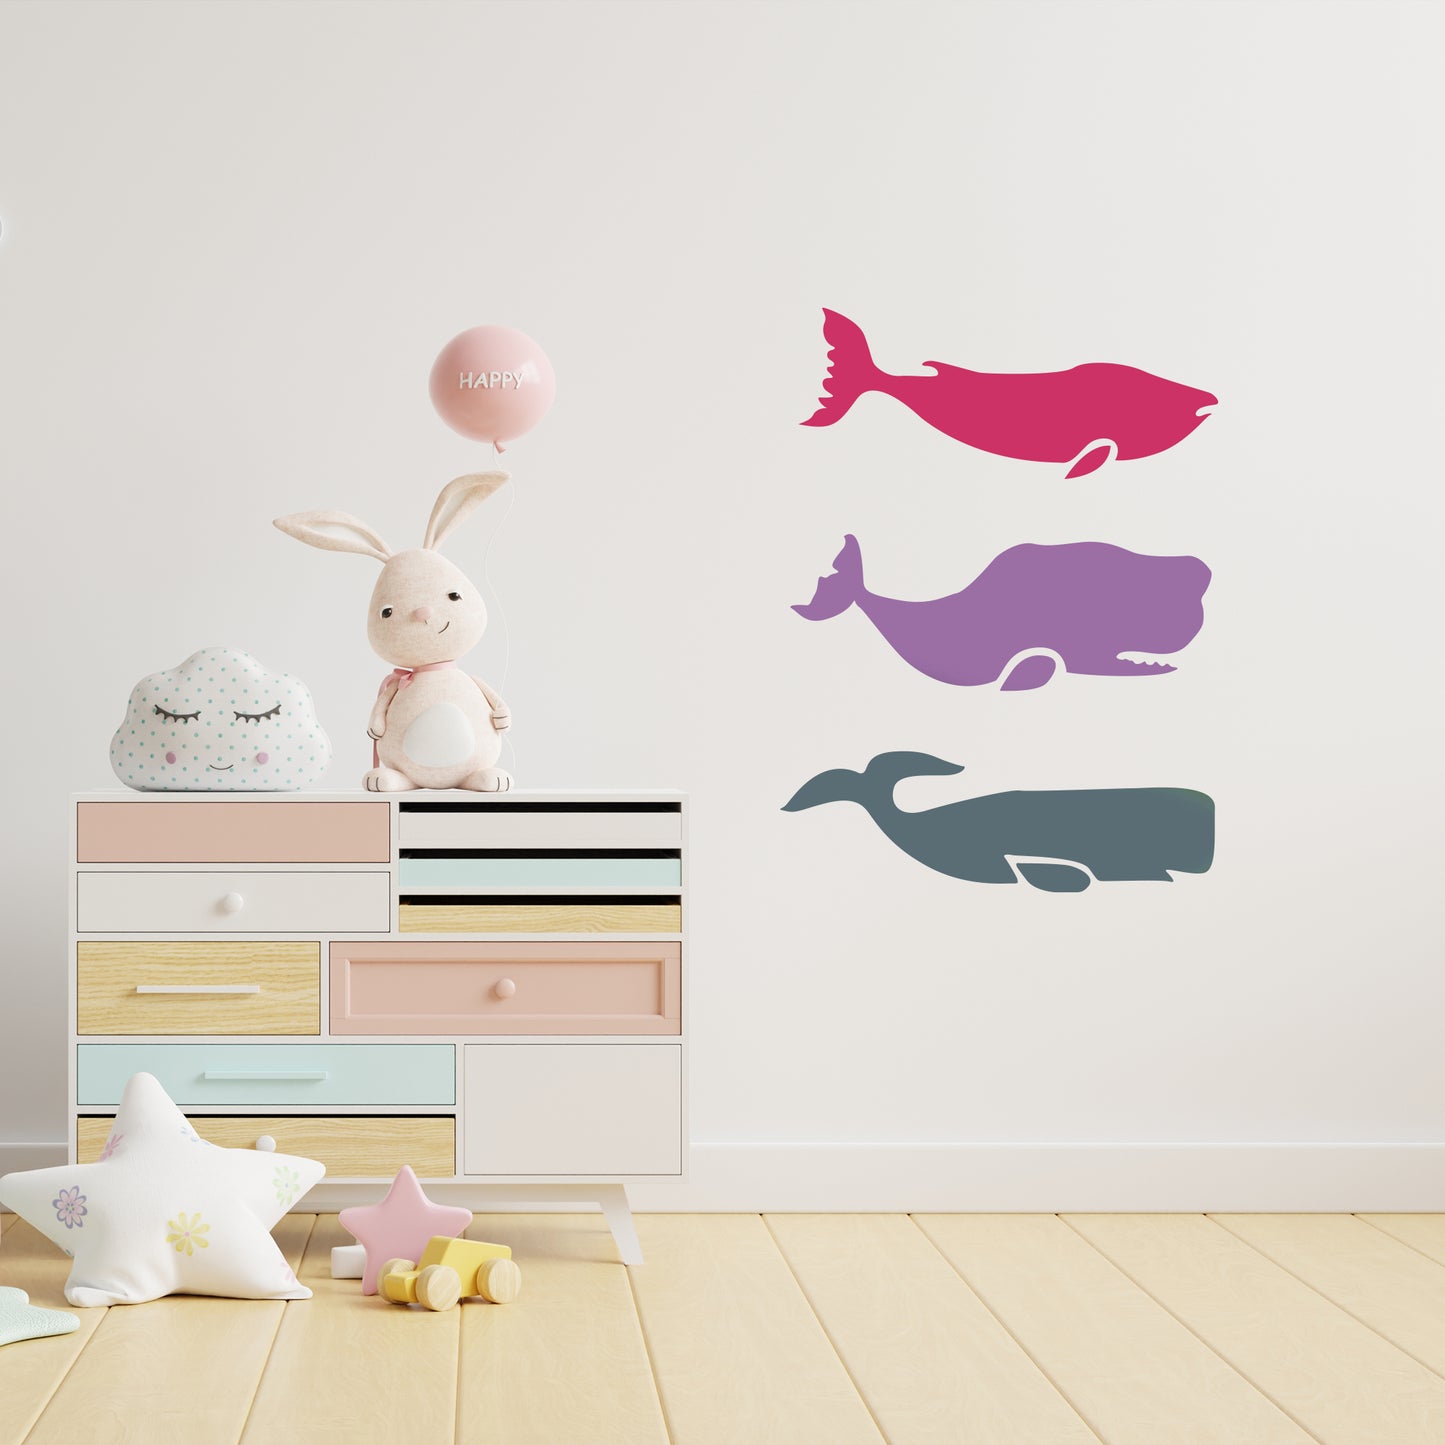 Willy Whale Design Stencil for Wall Painting (KDMD1446)